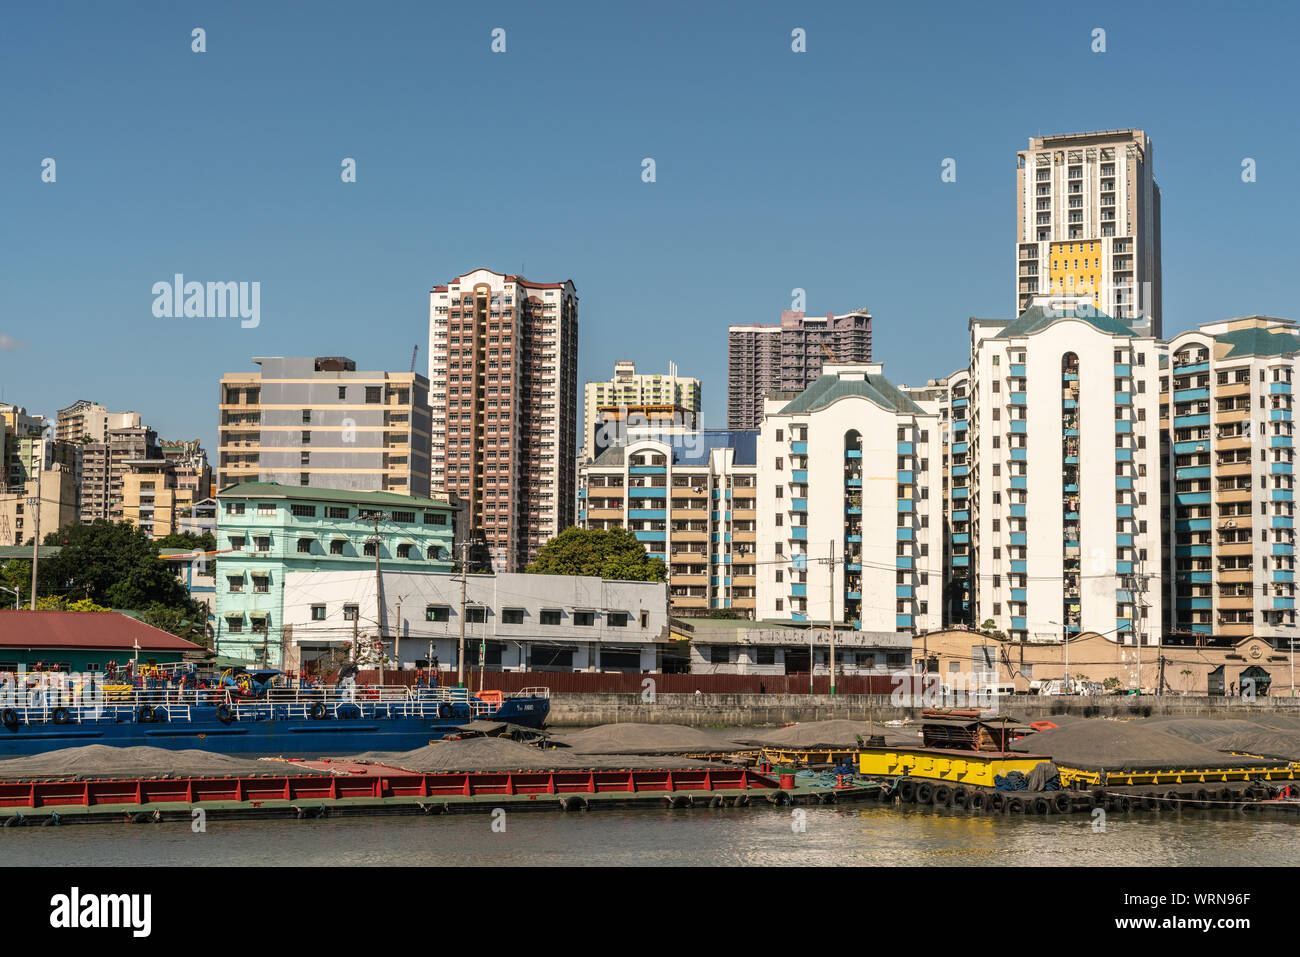 Manila, Philippines - March 5, 2019: Outside Fort Santiago. Barges and skyscrapers apartment buildings across Pasig River under blue sky. Stock Photo